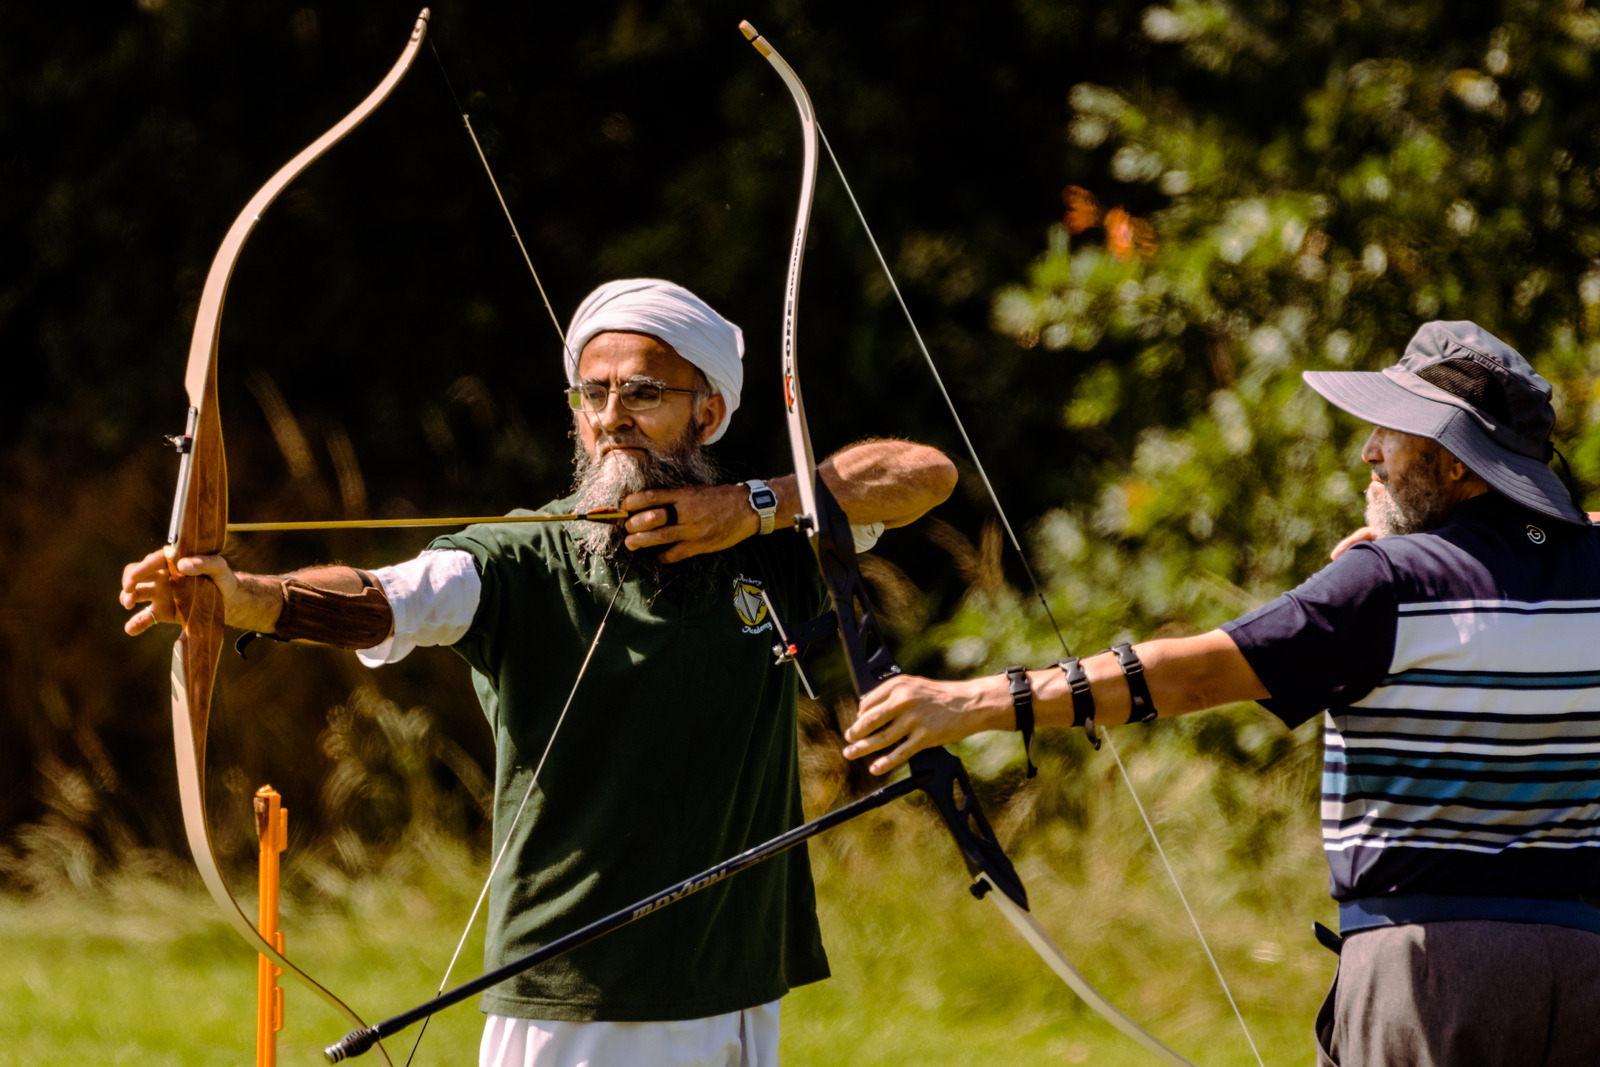 Members of the Muslim Sports Foundation try archery at Archery GB's headquarters at Lilleshall